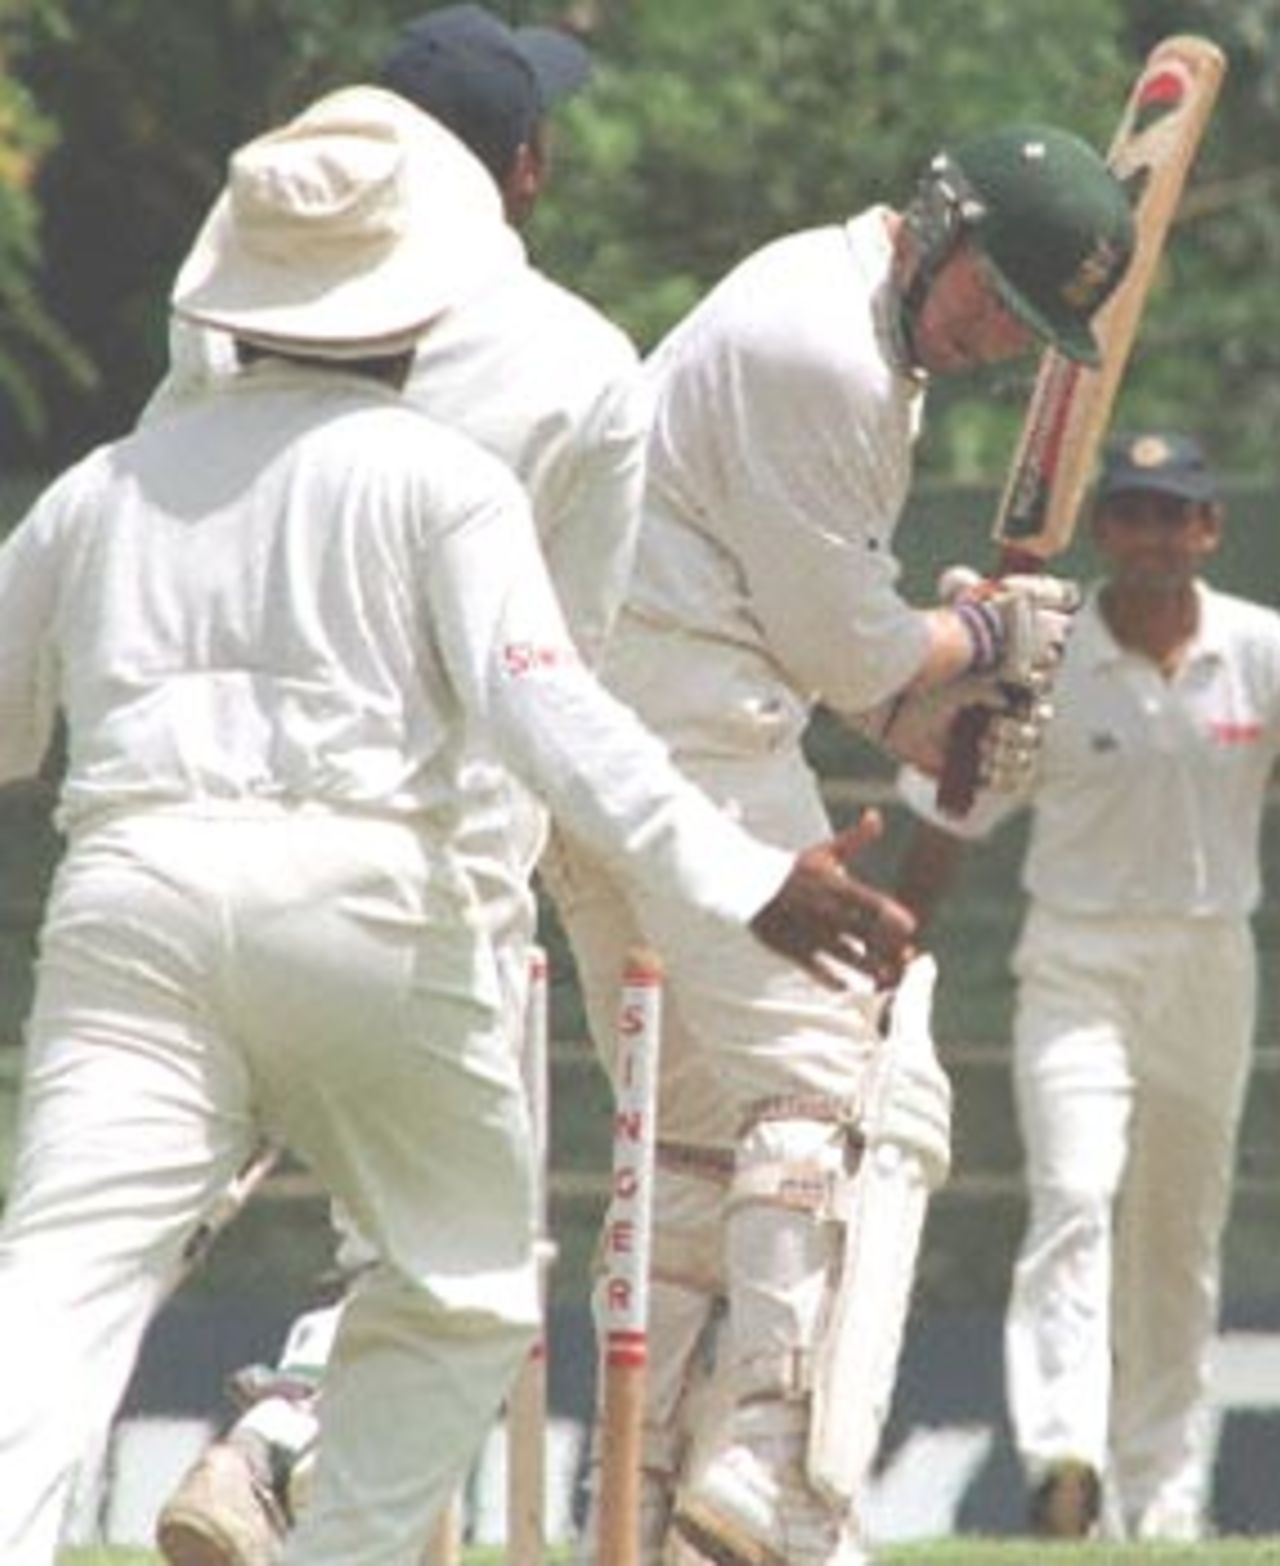 South African batsman Daryll Cullinan (2nd R) looks back to see a ball from Sri Lankan bowler Kumar Dharmasena (R) hit his stumps during the first day of the second test cricket match between Sri lanka and South Africa at the Asgiriya International Stadium in Kandy, Sri Lanka 30 July 2000. South Africa made 253 runs for the first innings. Klusener and Mark Boucher hit half-centuries apiece to save South Africa from total collapse on the opening day of the Test.